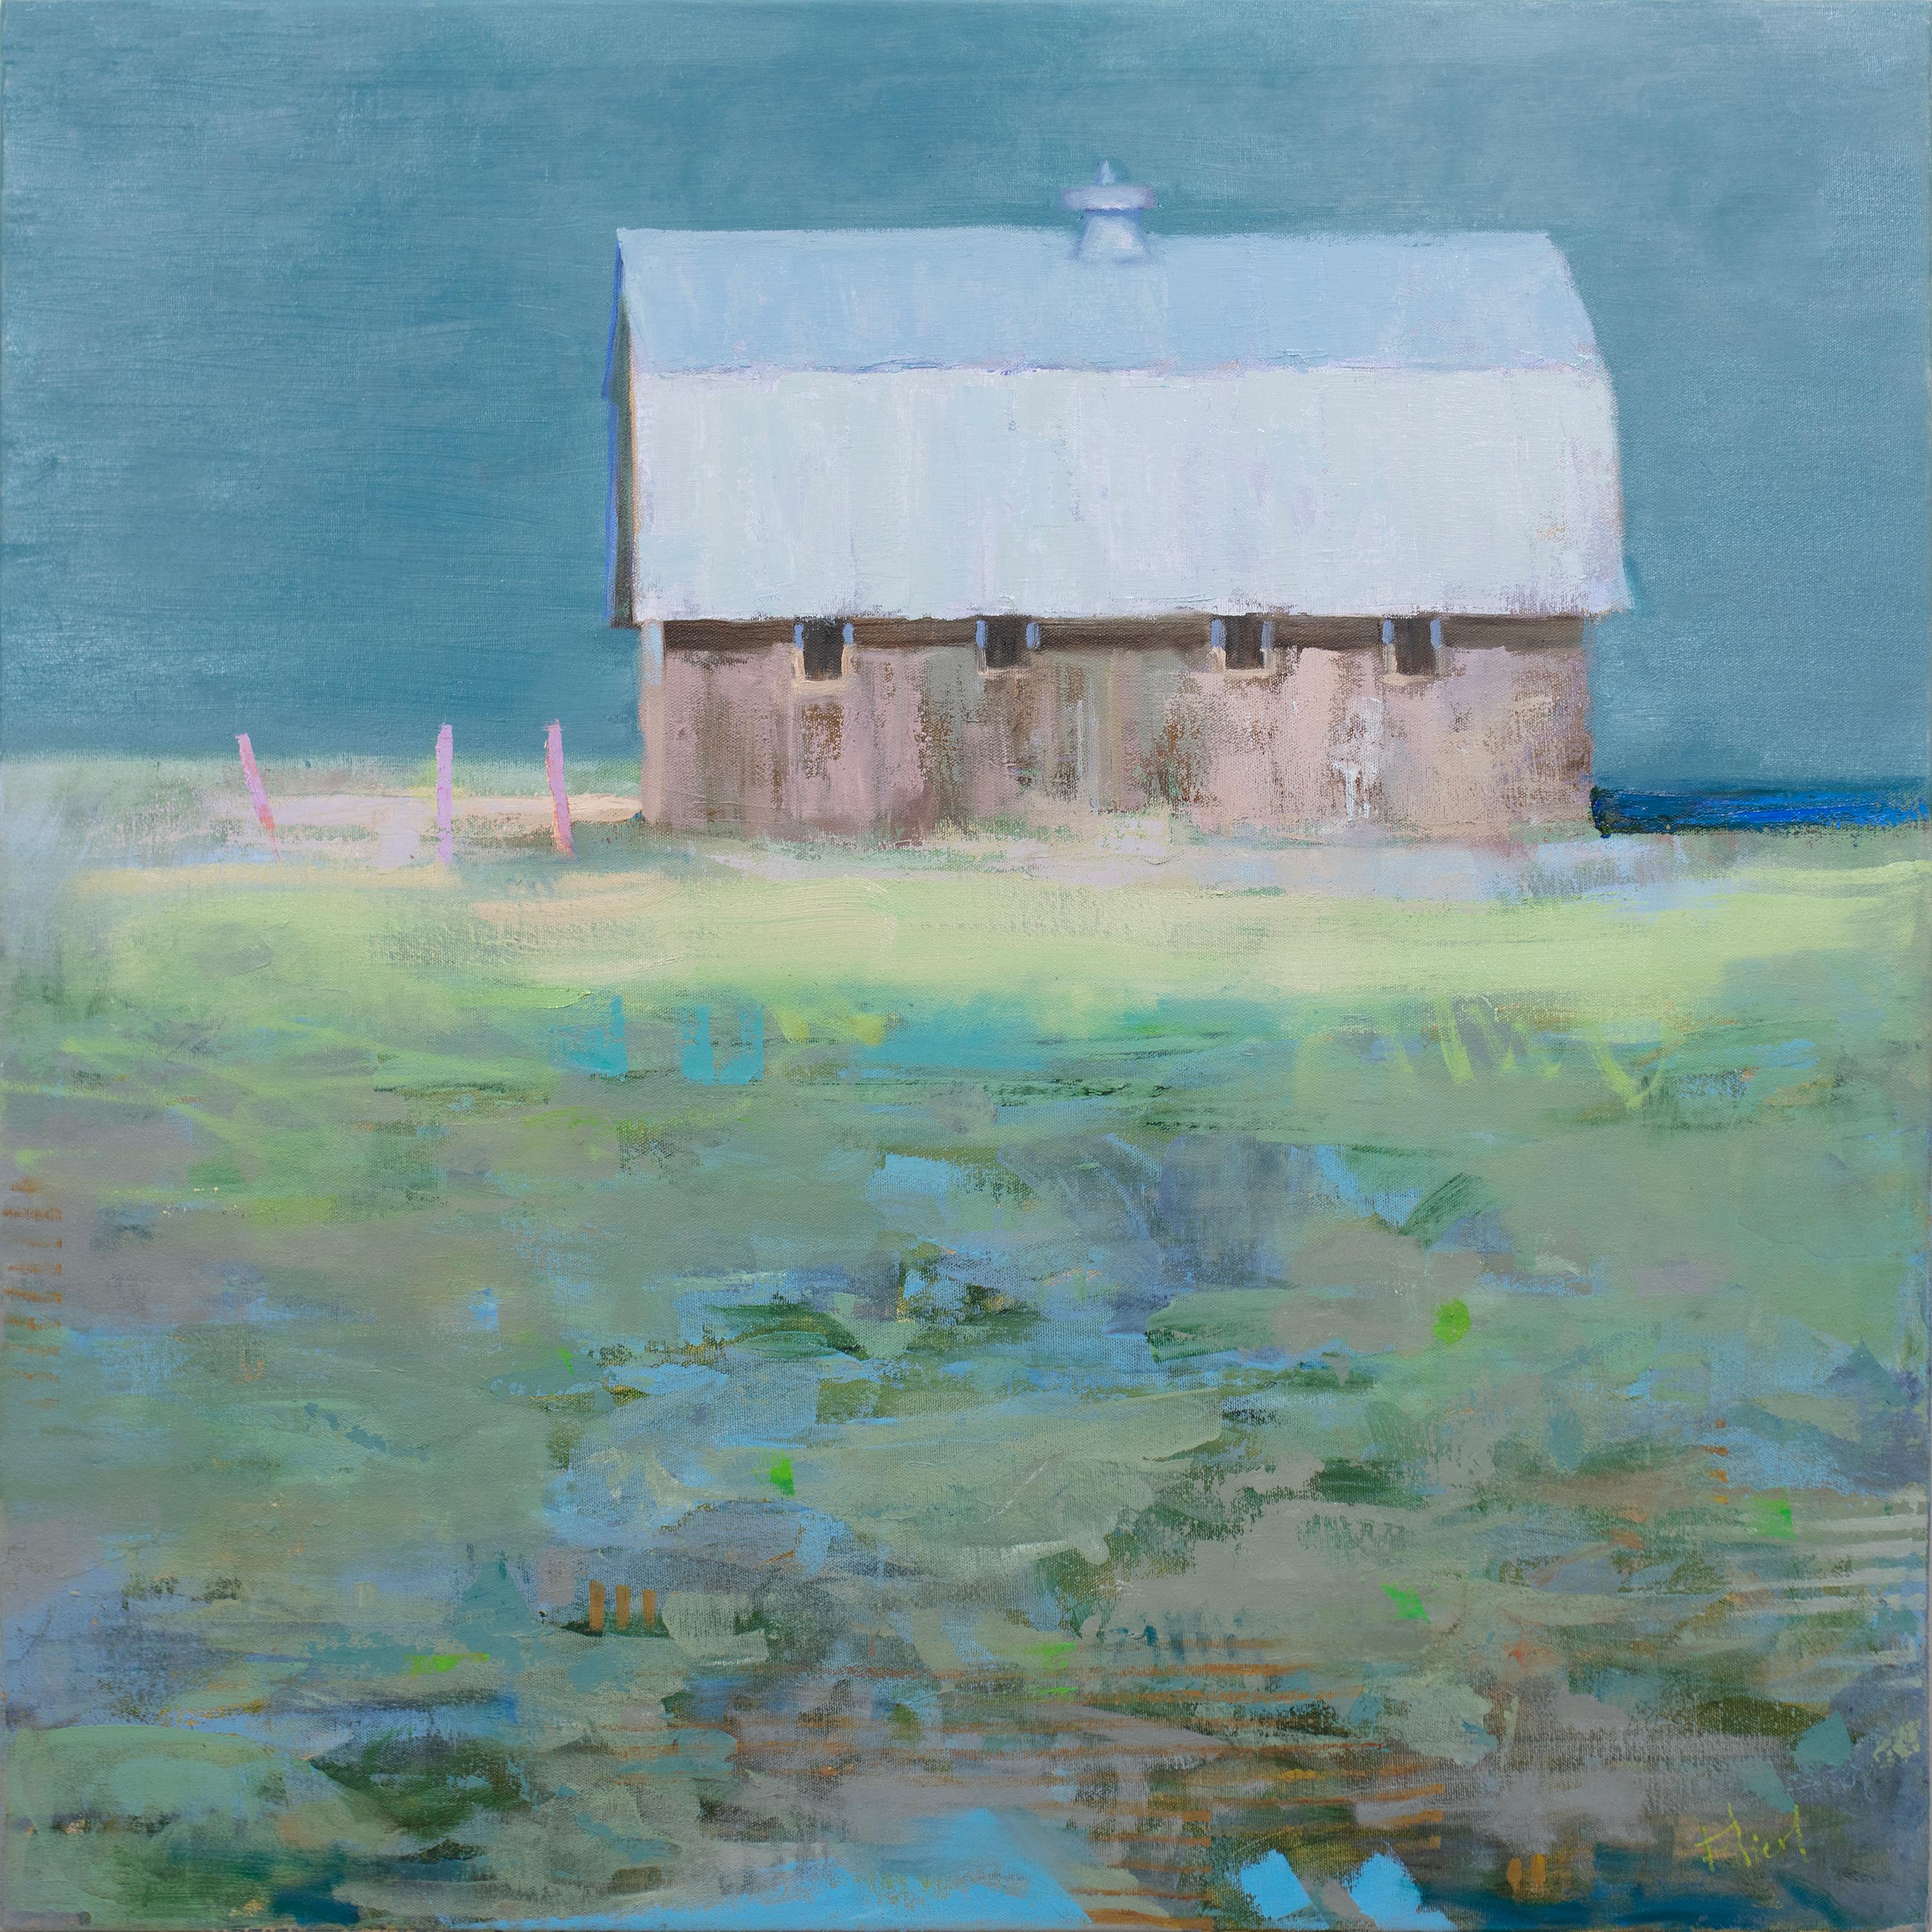 This landscape painting by Kay Flierl is made with oil paint on canvas and features a cool, earth-toned palette. It captures a rural scene of a barn in a green field under a muted blue sky, with painterly brush strokes lightly abstracting the scene